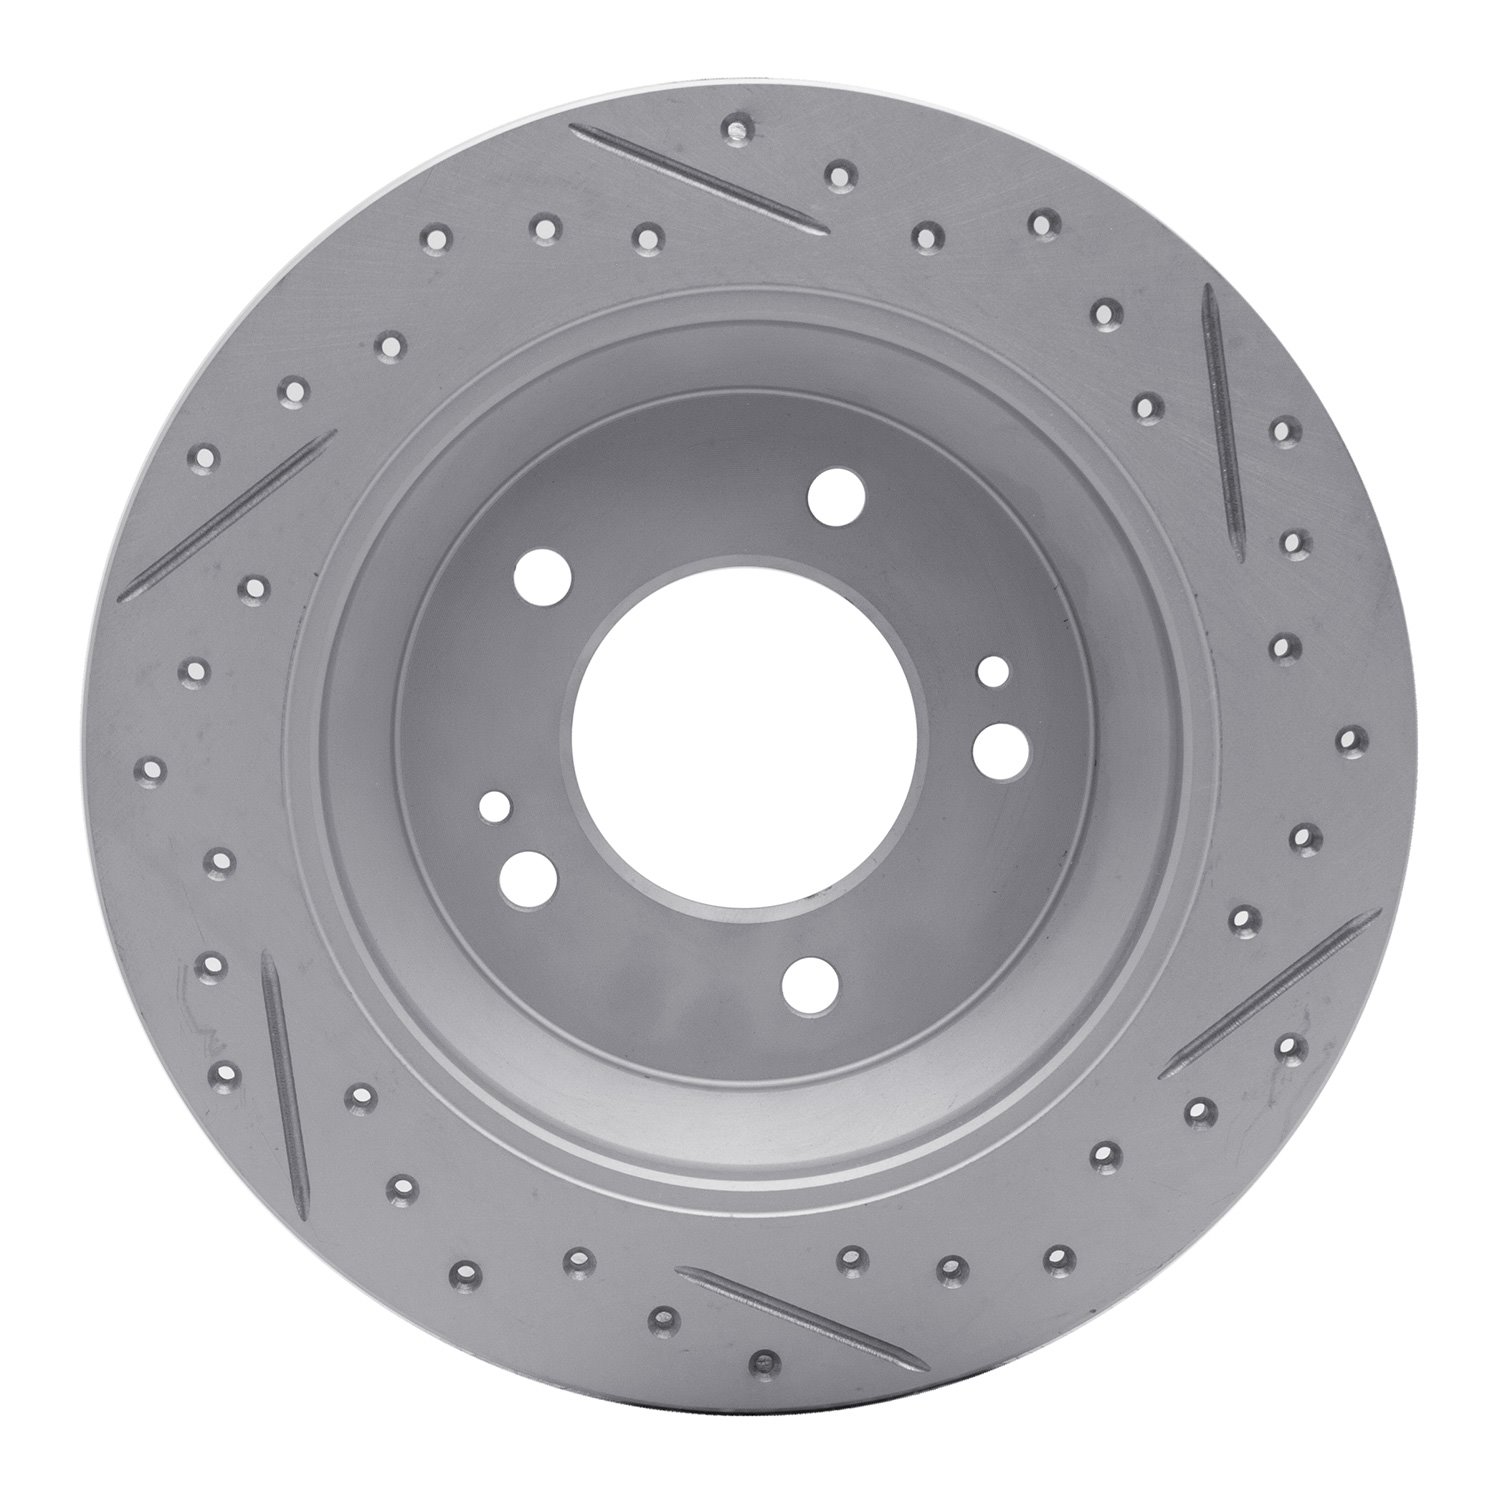 830-03059L Geoperformance Drilled/Slotted Brake Rotor, Fits Select Kia/Hyundai/Genesis, Position: Rear Left